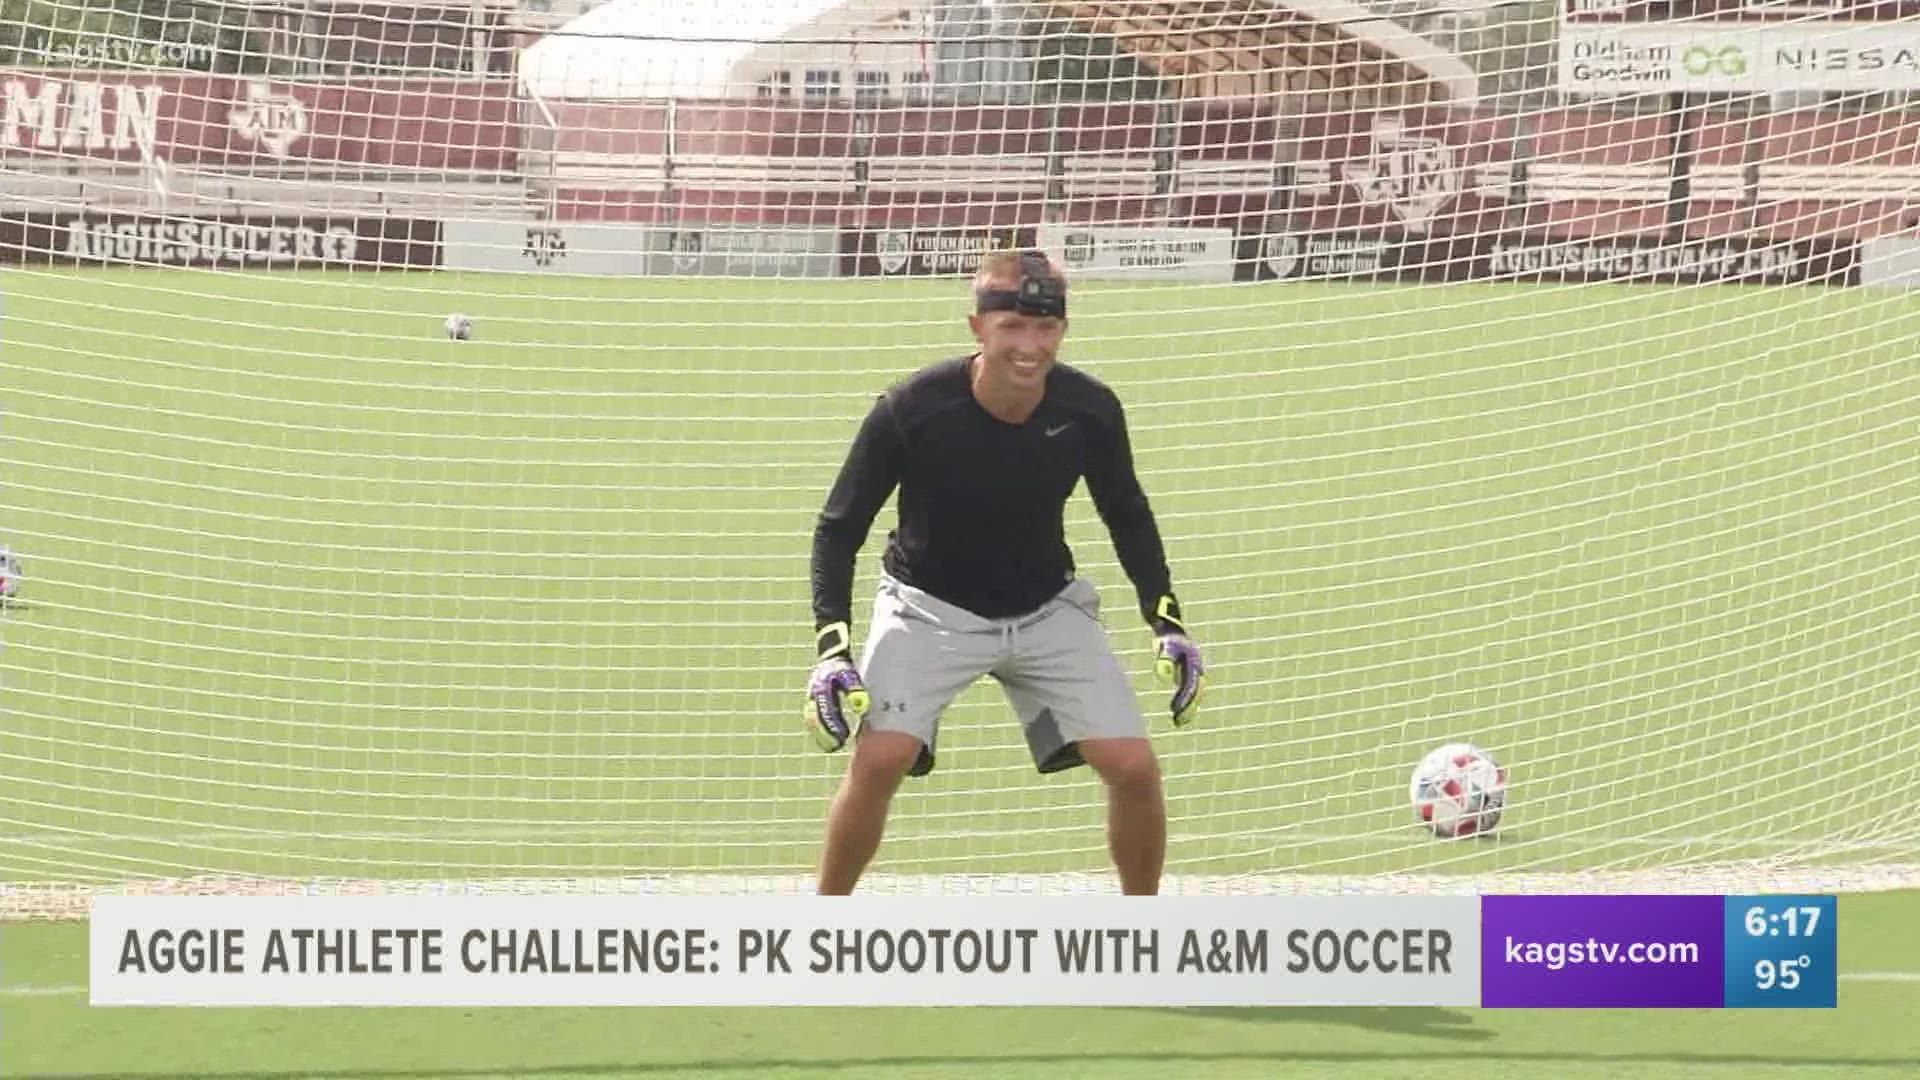 Mike Lucas and Justin Woodard challenged the Texas A&M soccer team to a penalty kick shootout. It didn't go well for Team KAGS